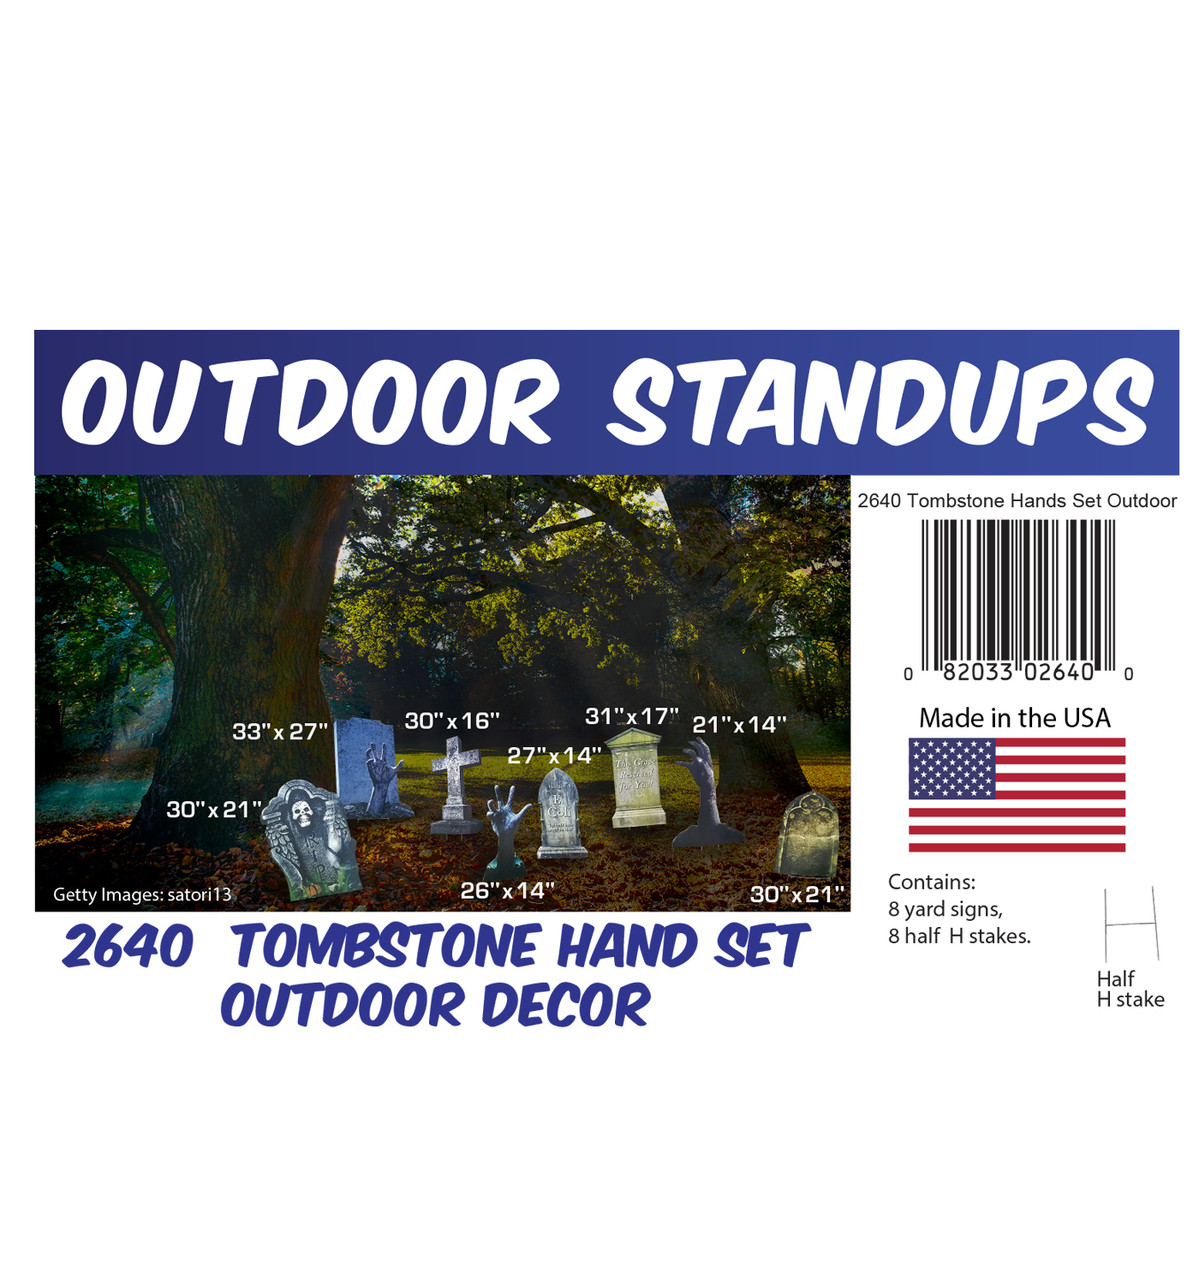 Tombstone and Hands Set Outdoor Decor with setting, dimensions and list of items included.